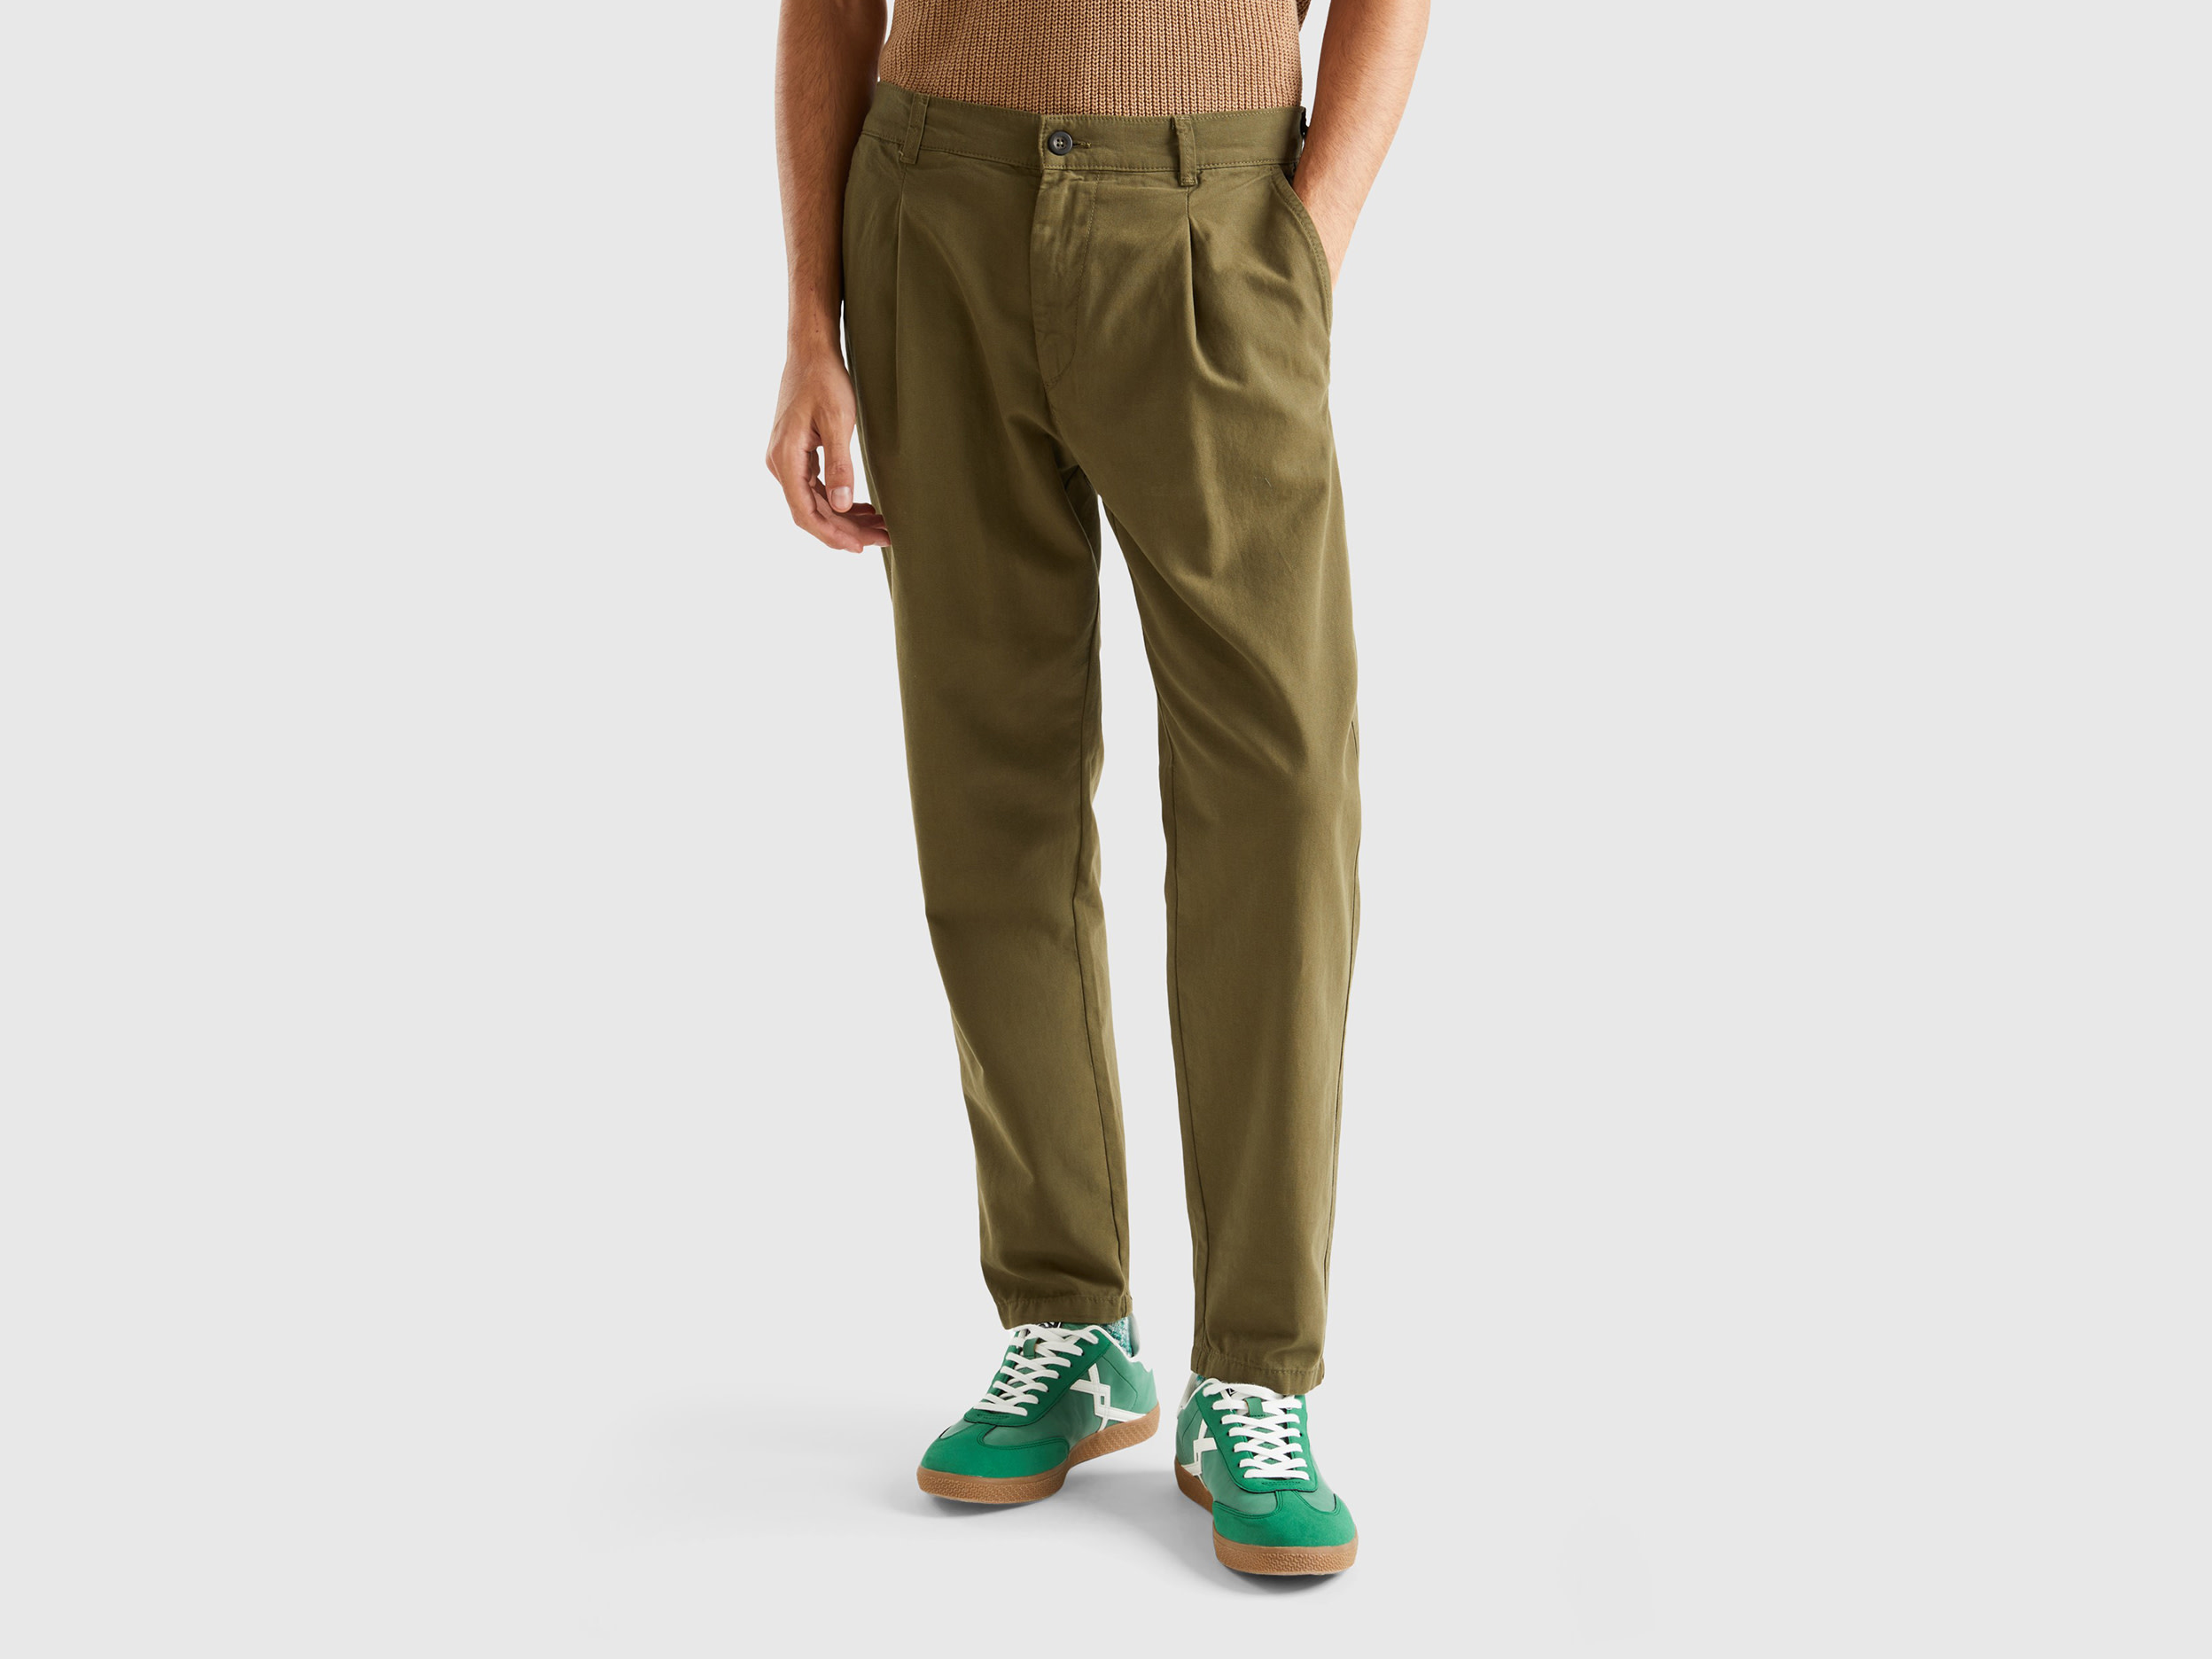 Benetton, Carrot Fit Chinos In Light Cotton, size 40, Military Green, Men